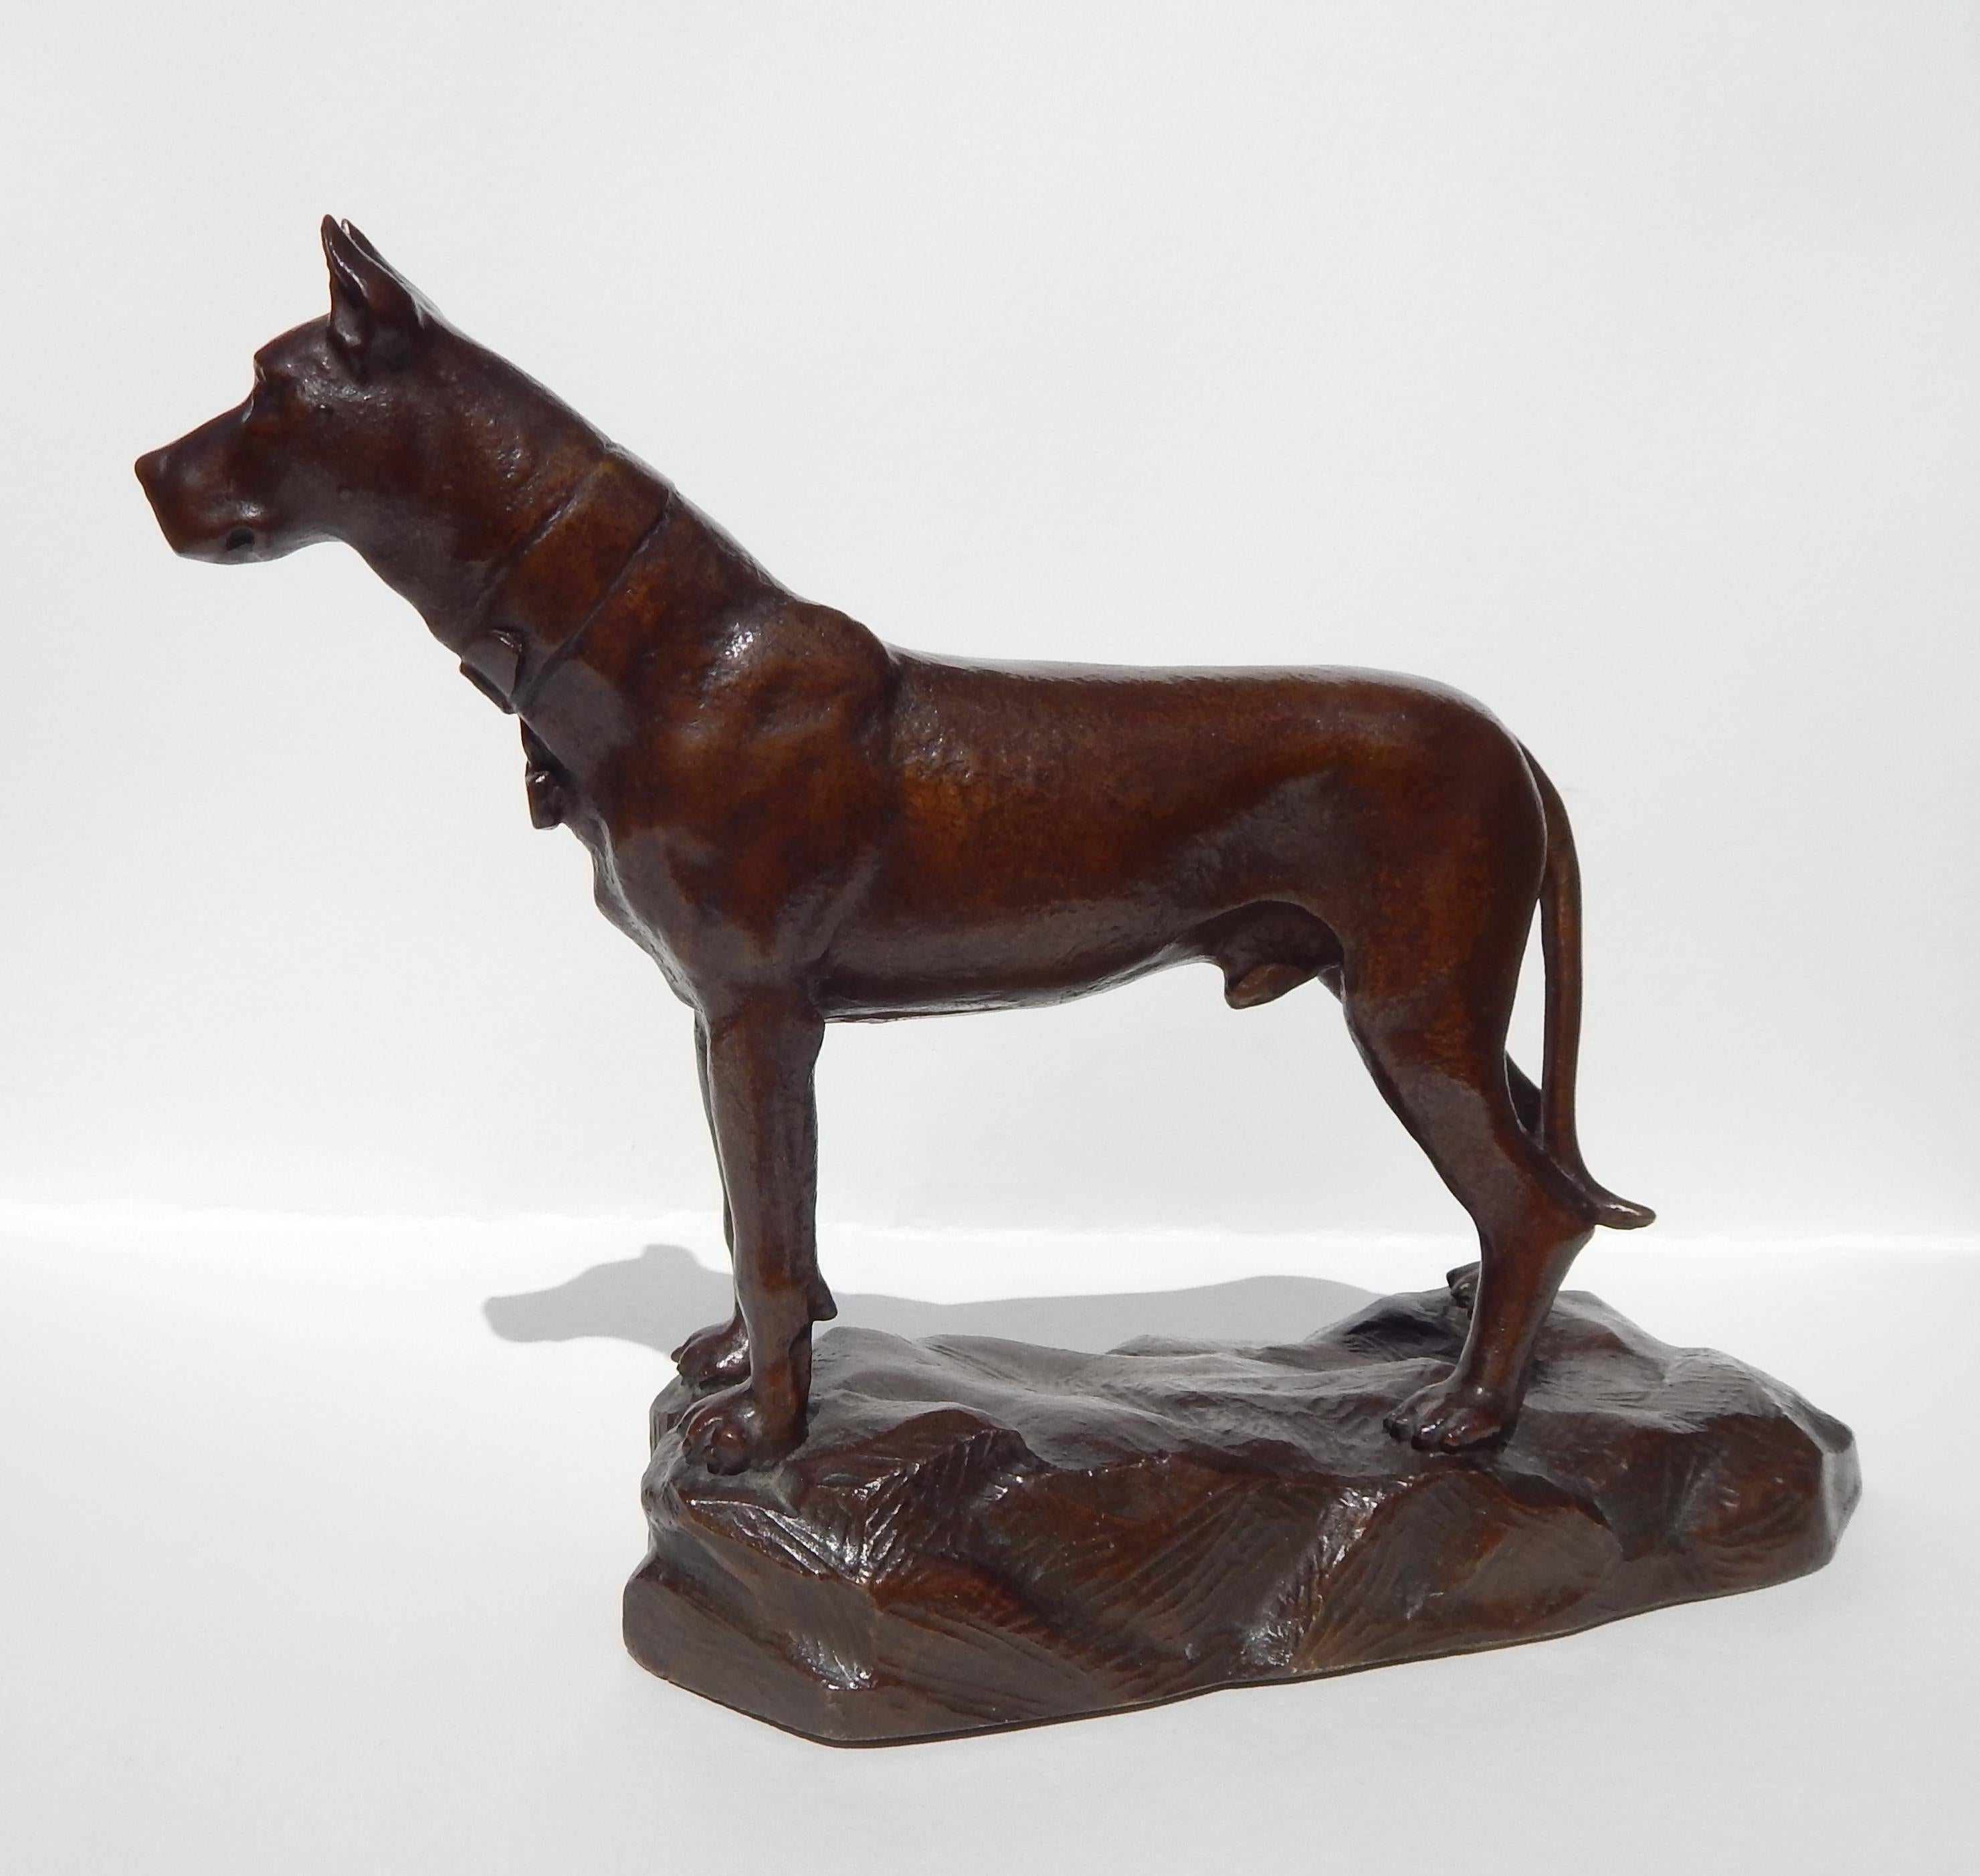 This wonderful bronze by Antonio de Fillipo (1900-1993) depicts the regal Great Dane.
It bears a warm, satiny patina and is in excellent condition. The dog stands 10